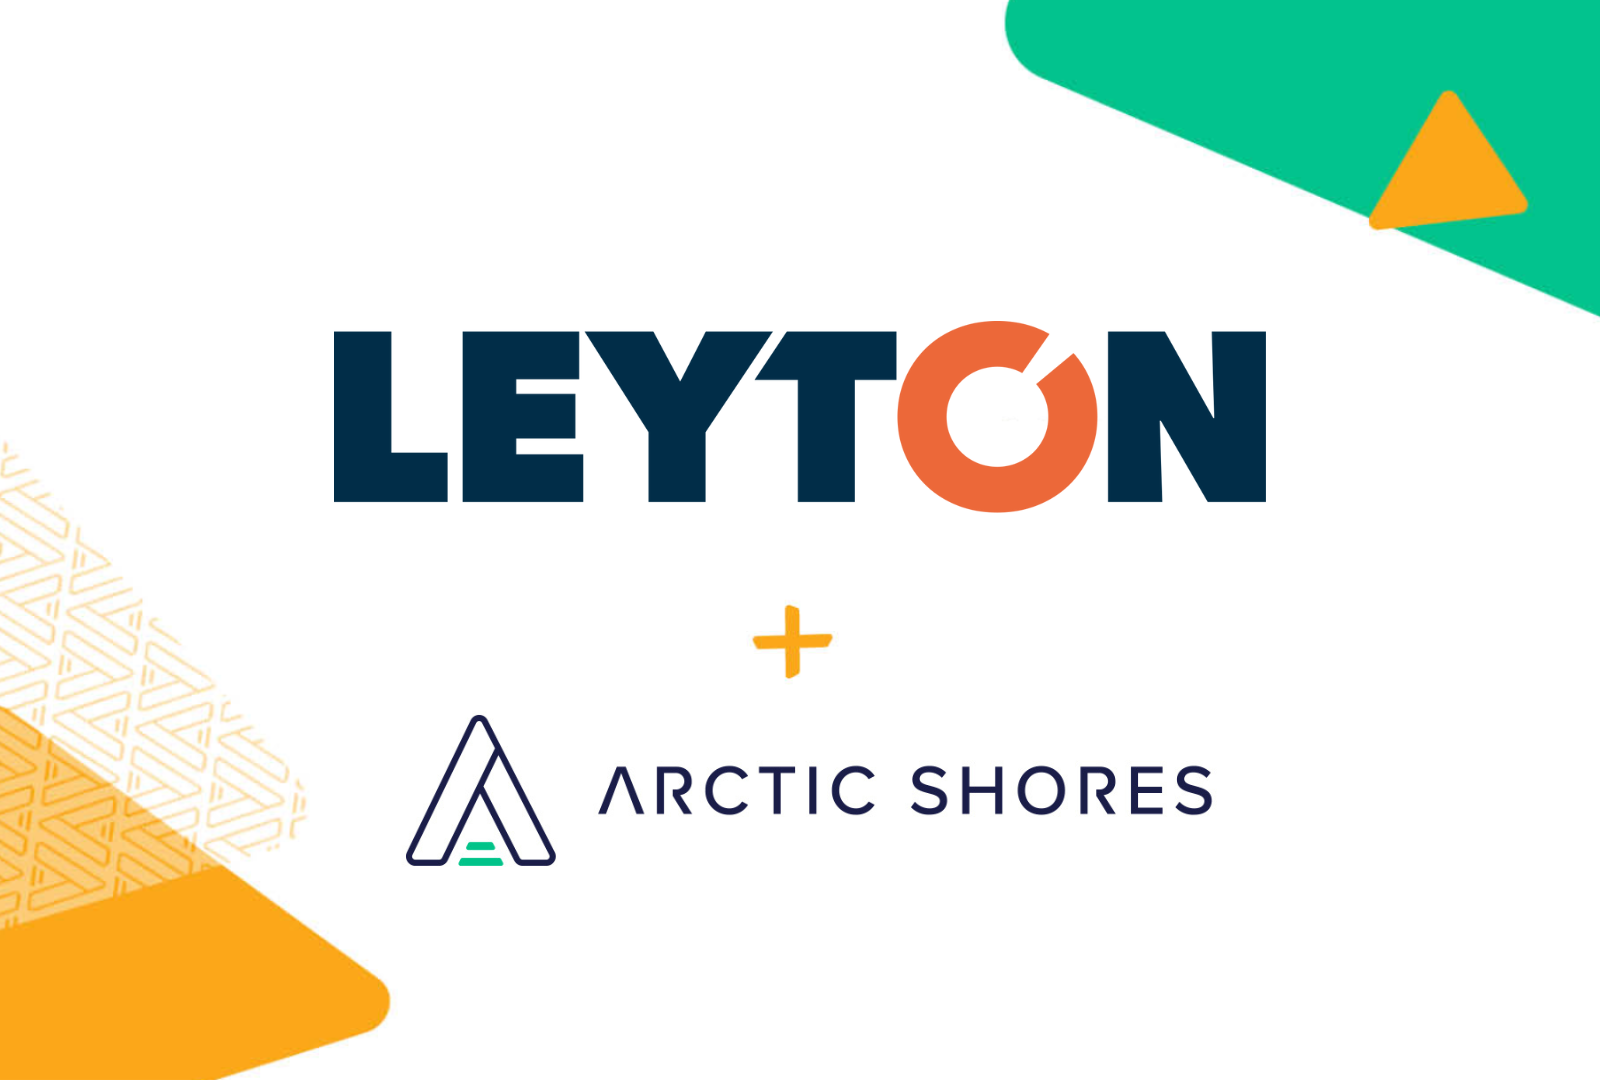 Leyton partners with Arctic Shores to scrap the CV and reduce recruitment costs by 90%